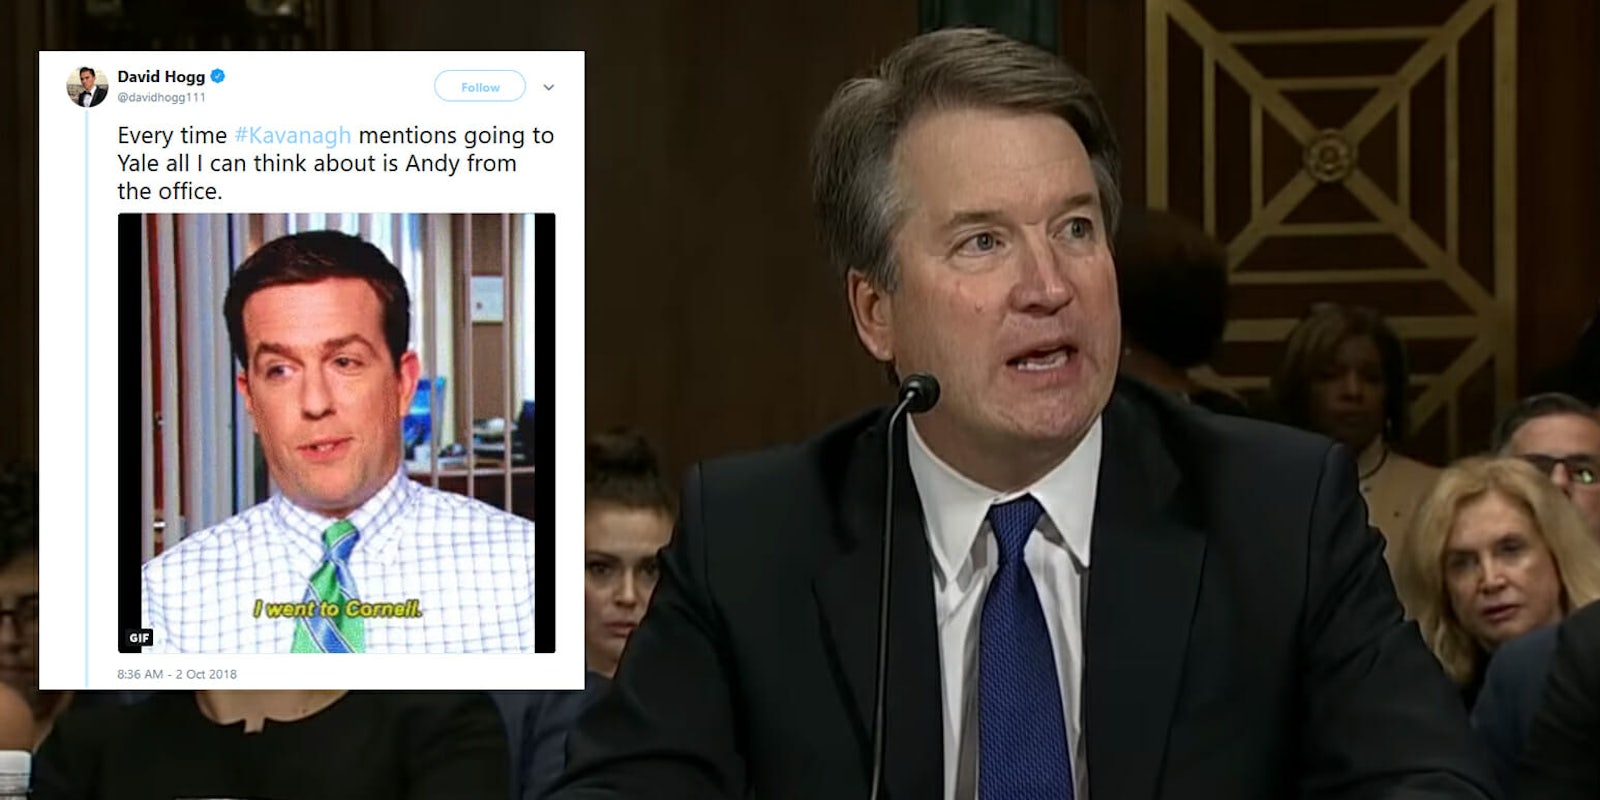 Parkland survivor David Hogg compared Supreme Court nominee Brett Kavanaugh to Andy Bernard from 'The Office' on Tuesday.